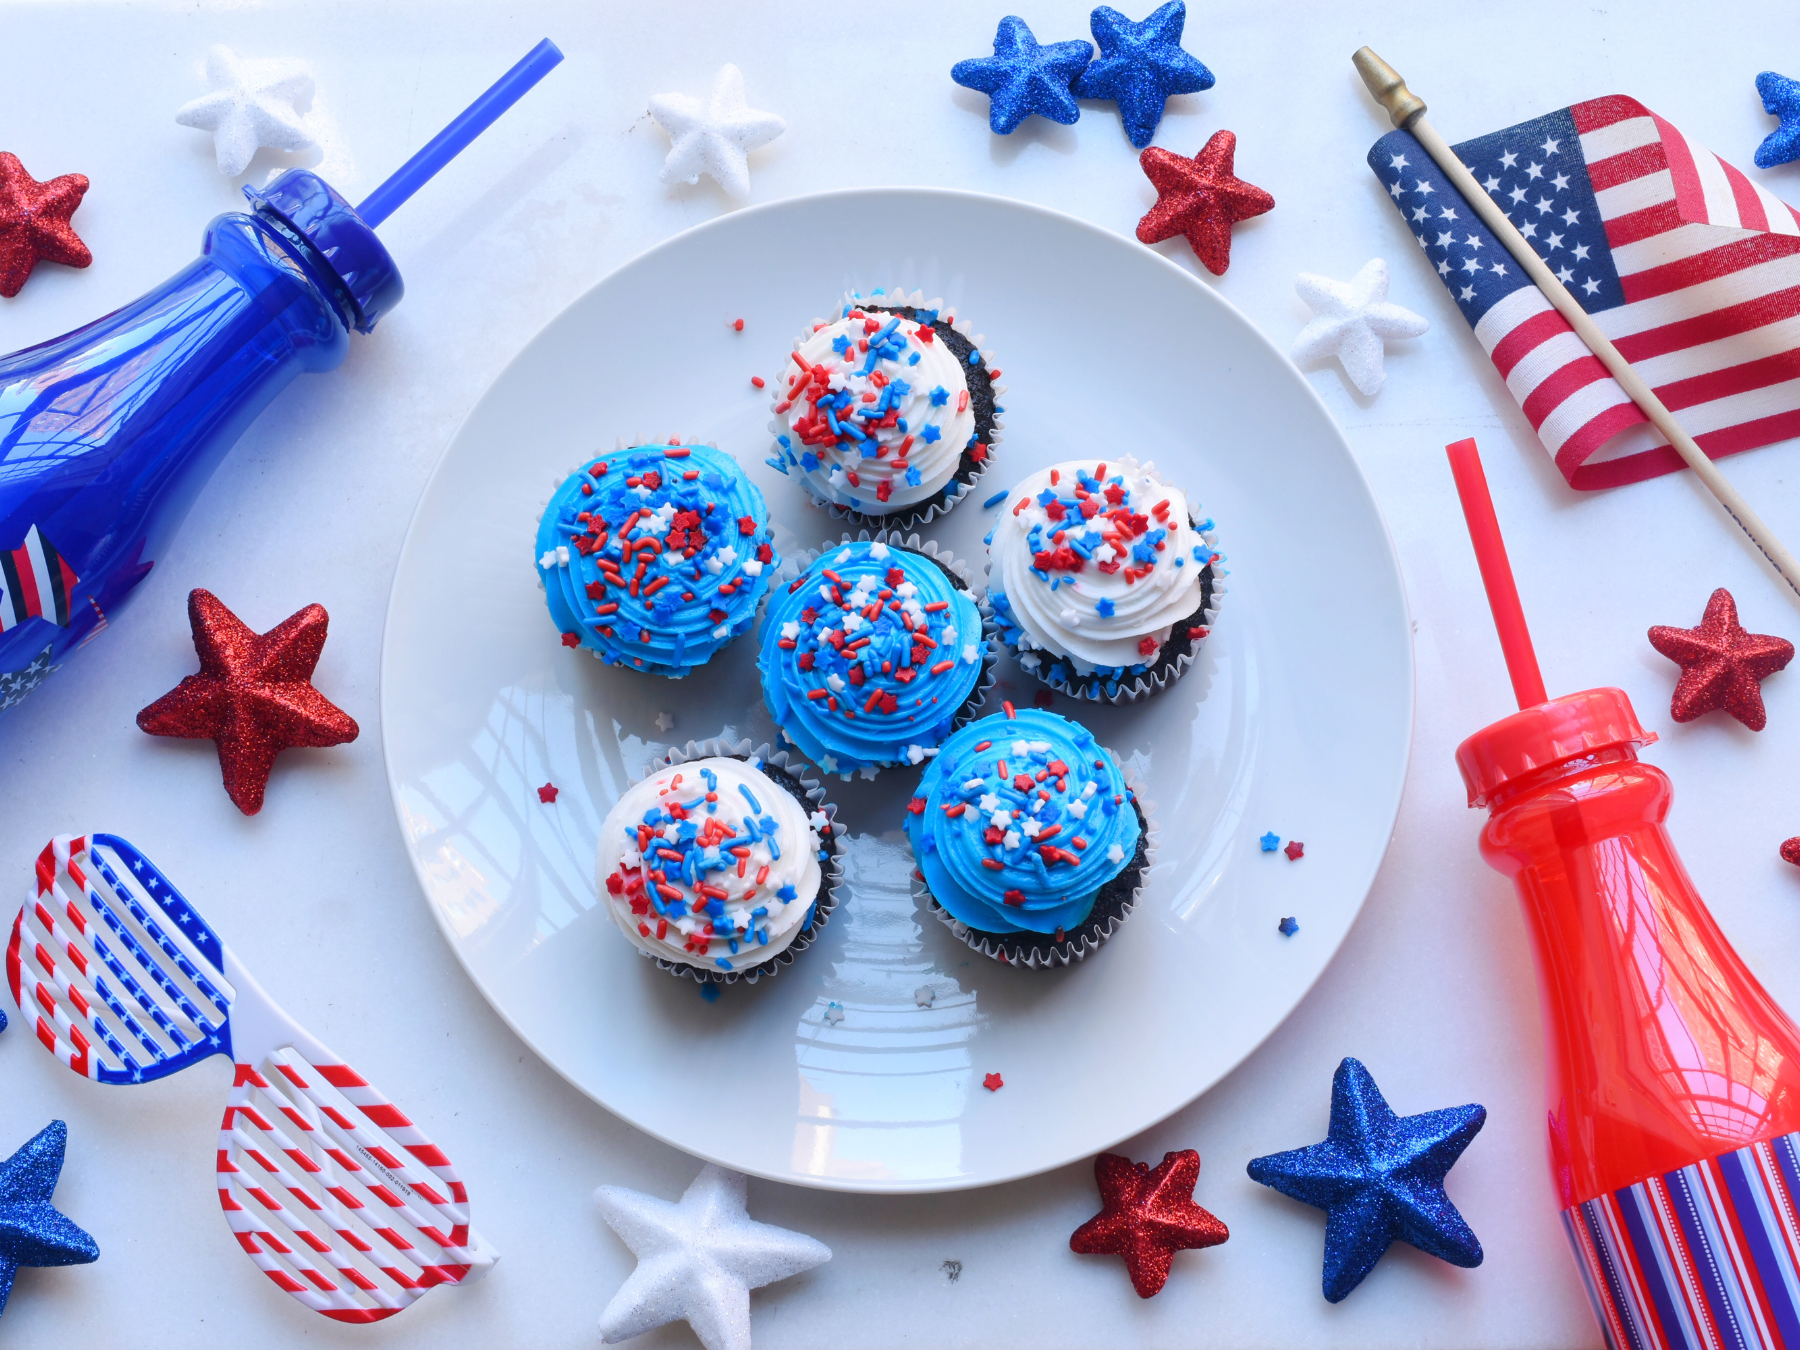 4th of July Bakeware and Baking Ideas!